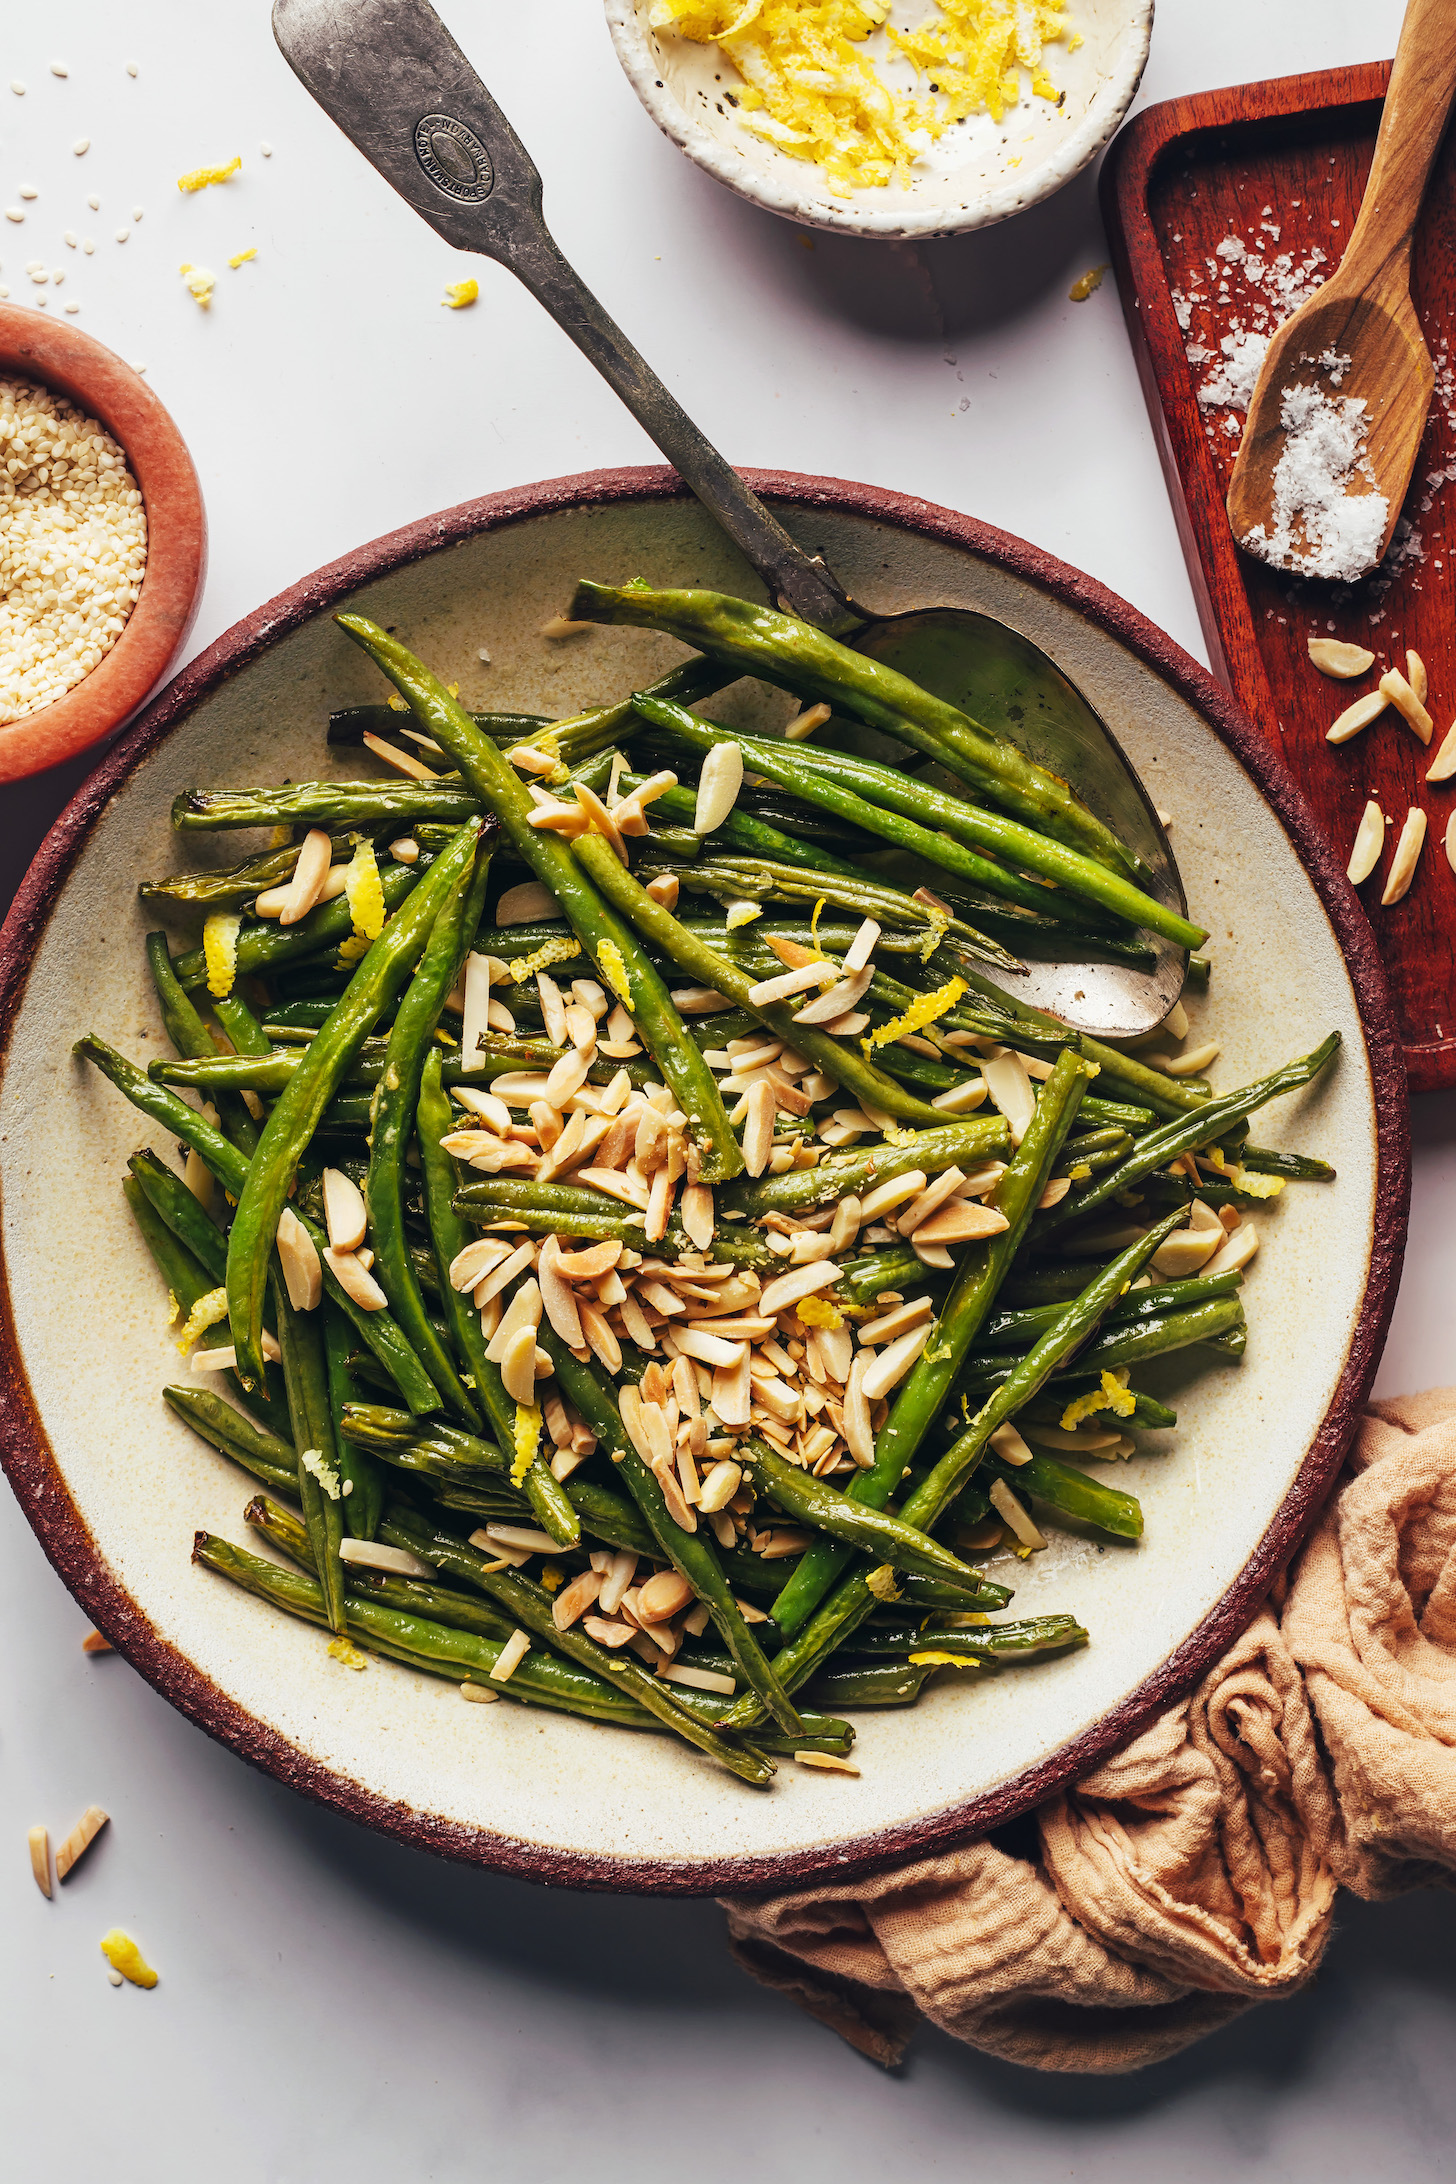 Lemon zest, sesame seeds, salt, and slivered almonds next to a bowl of roasted green beans topped with lemon zest and almonds